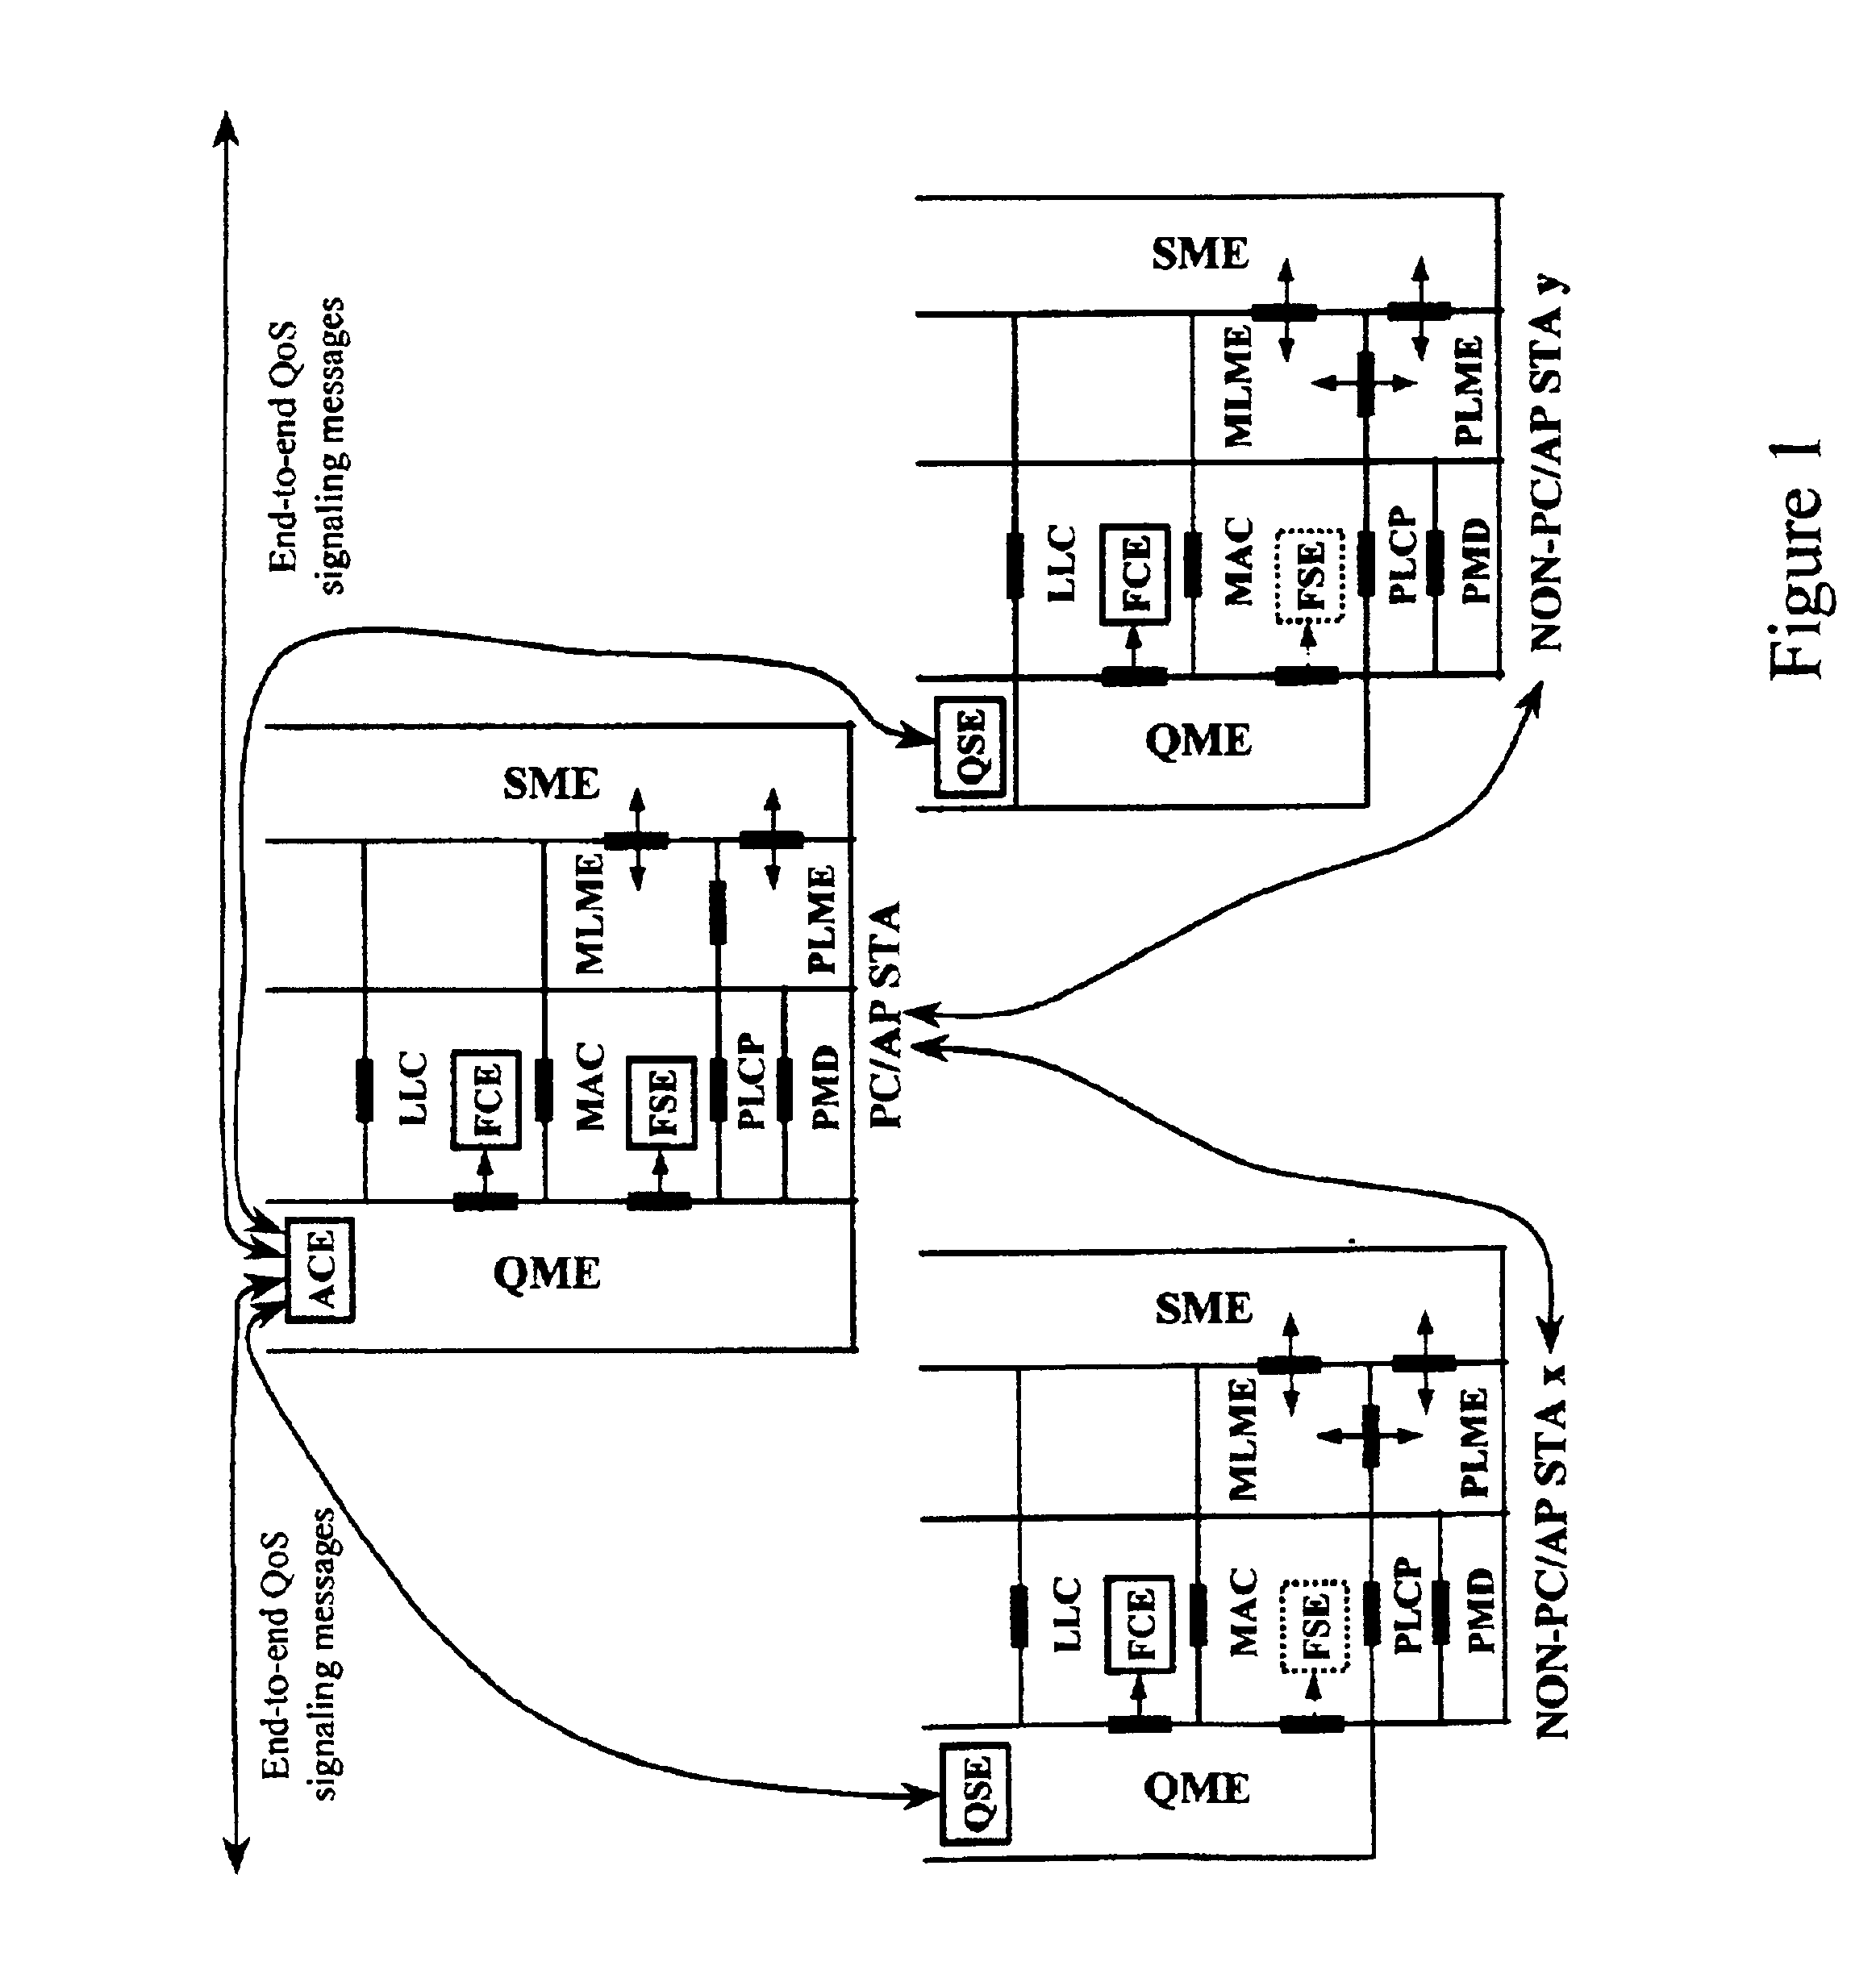 Admission control for QoS-Driven Wireless LANs